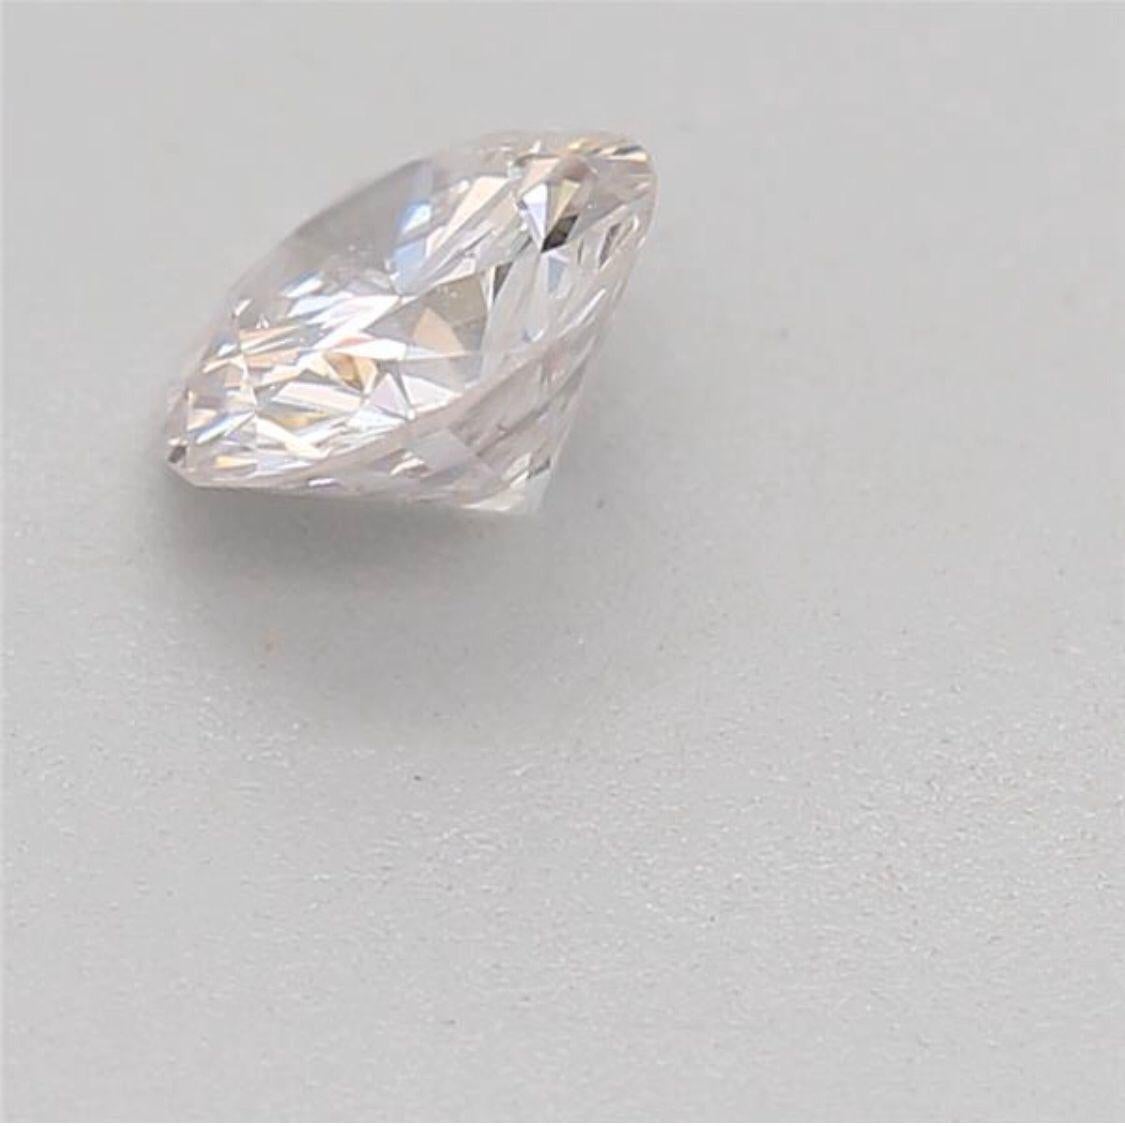 0.31 Carat Faint Pink Round Cut Diamond SI1 Clarity CGL Certified For Sale 6